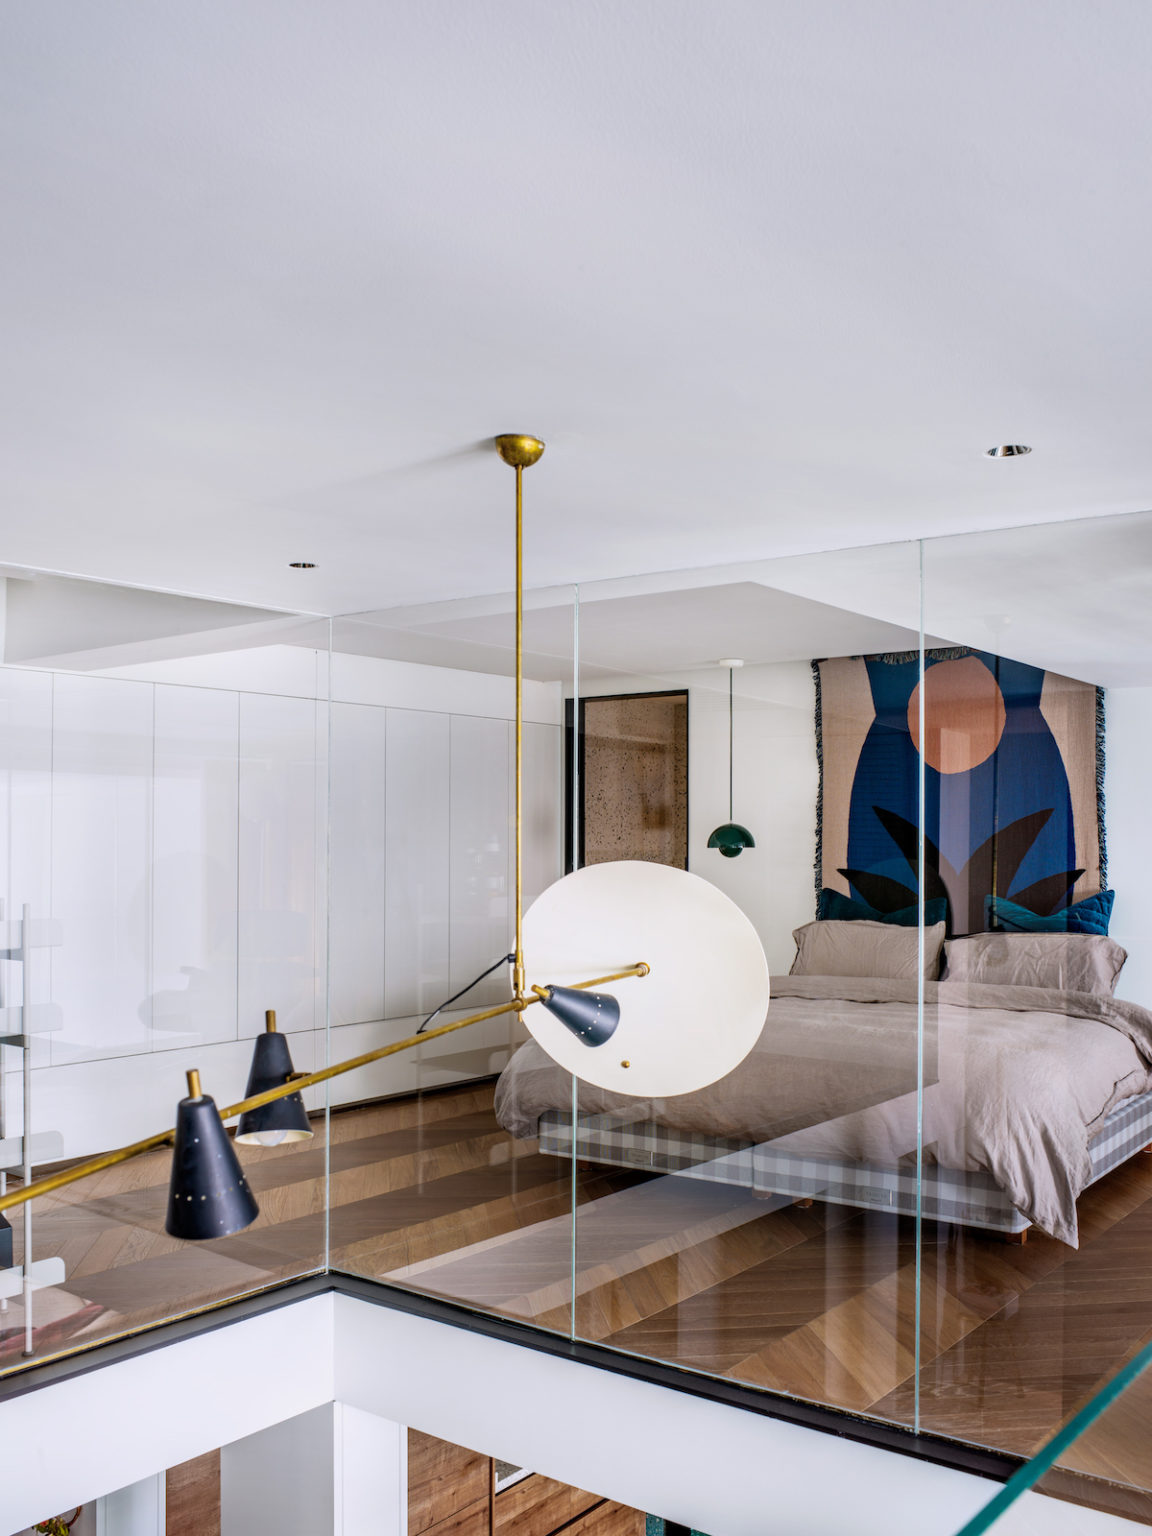 The bedroom features closed and sleek storage units, a floating bed, a bright artwork and hanging lamps